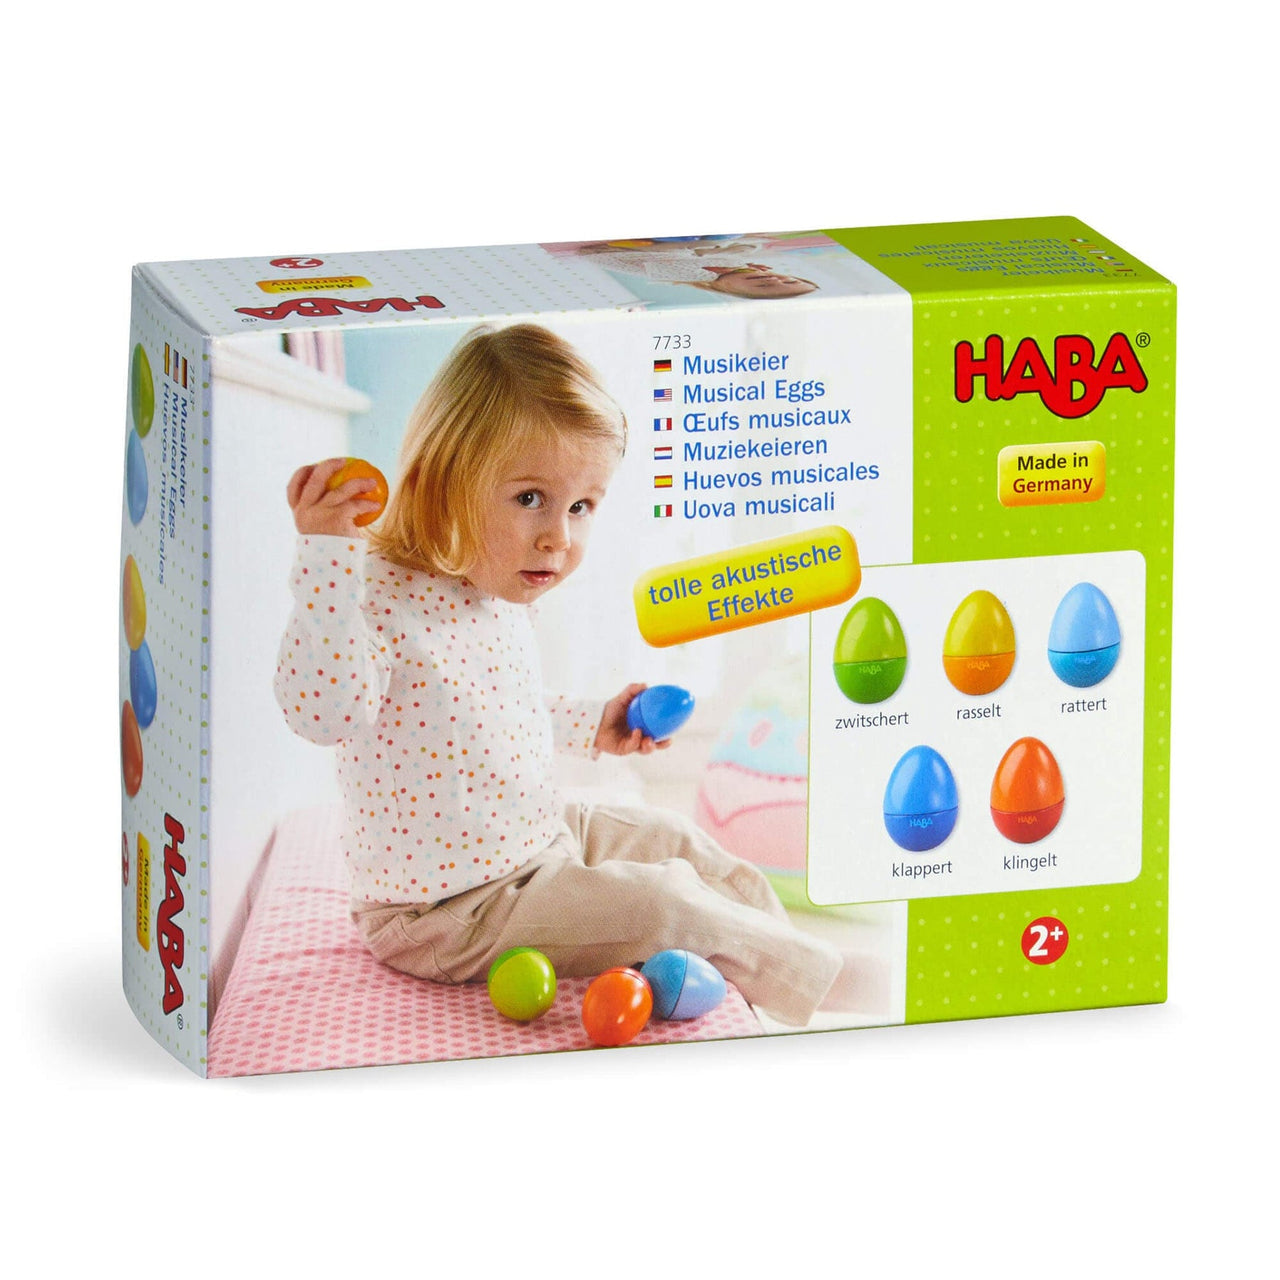 Haba Set of 5 Wooden Musical Eggs